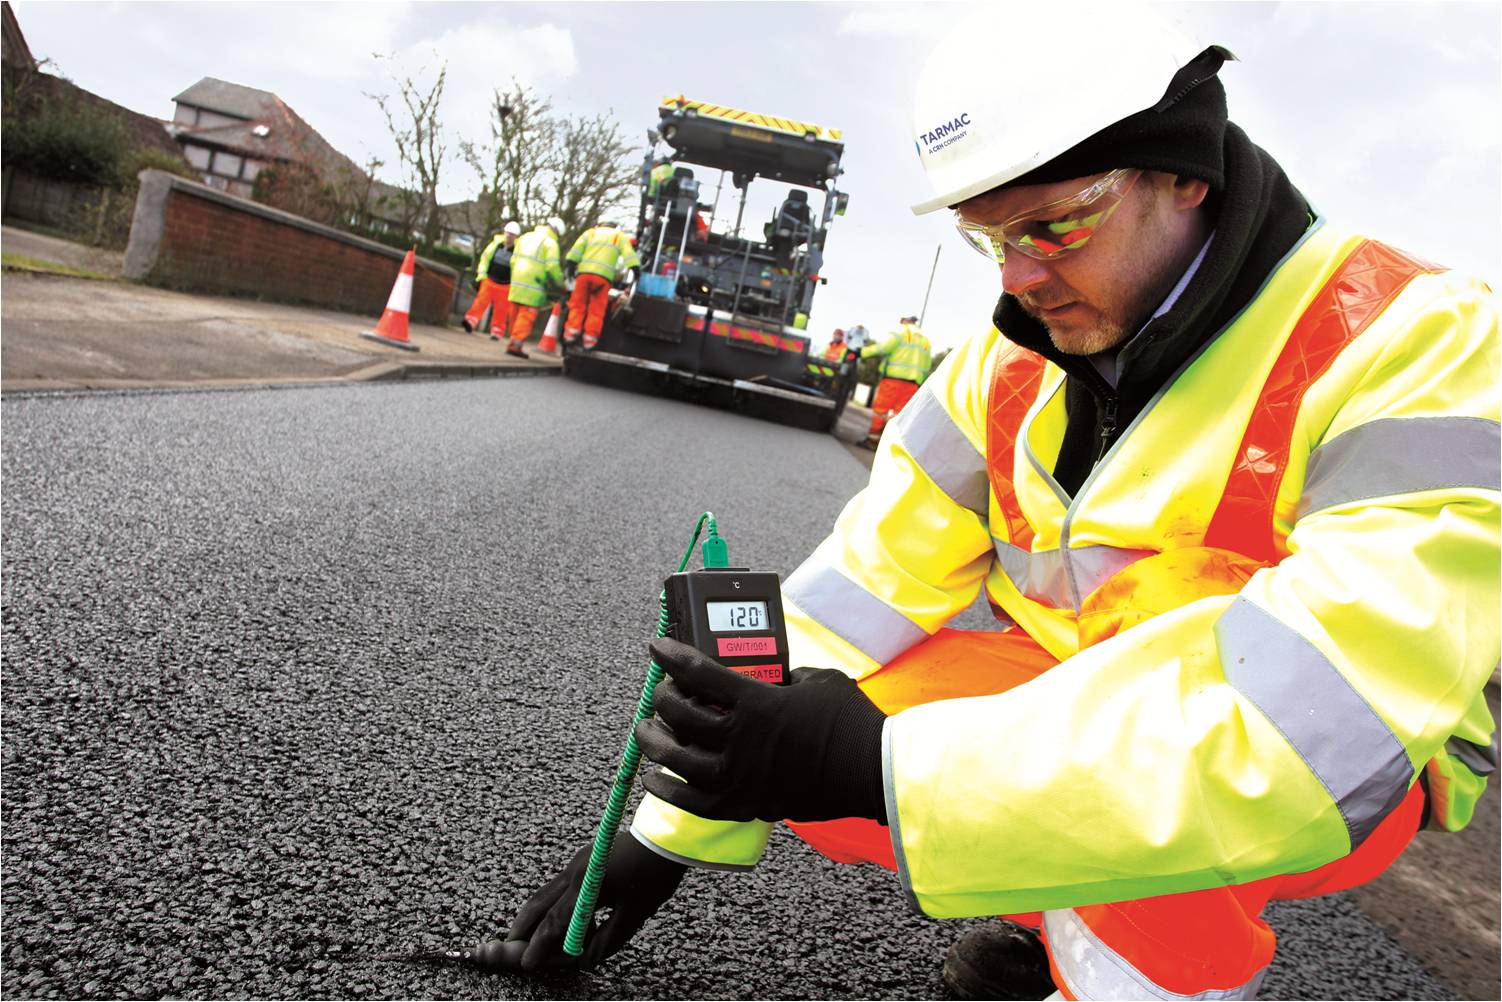 Tarmac says warm mix temperature asphalt technology can cut the embodied carbon of asphalt by up to 15%